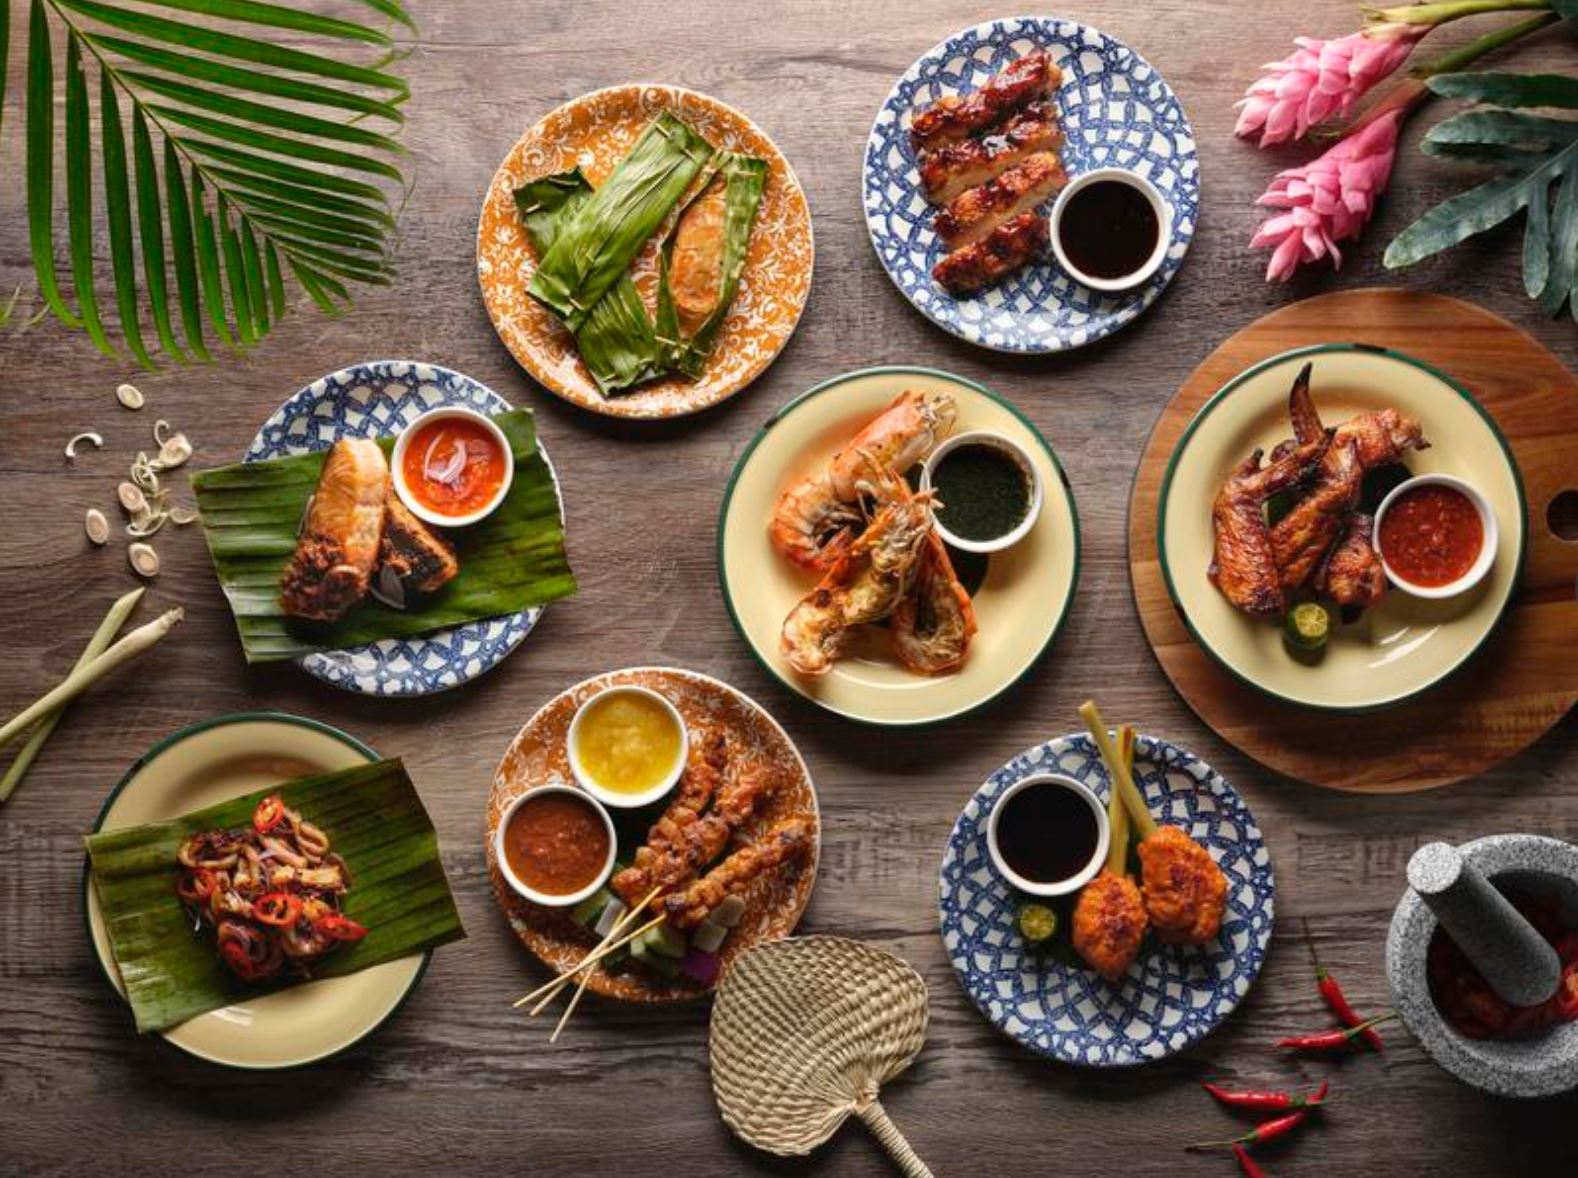 Lady dines free at four participating restaurants by Pan Pacific Hotels Group from 8 to 12 Mar 21, one redemption per table per bill - 4